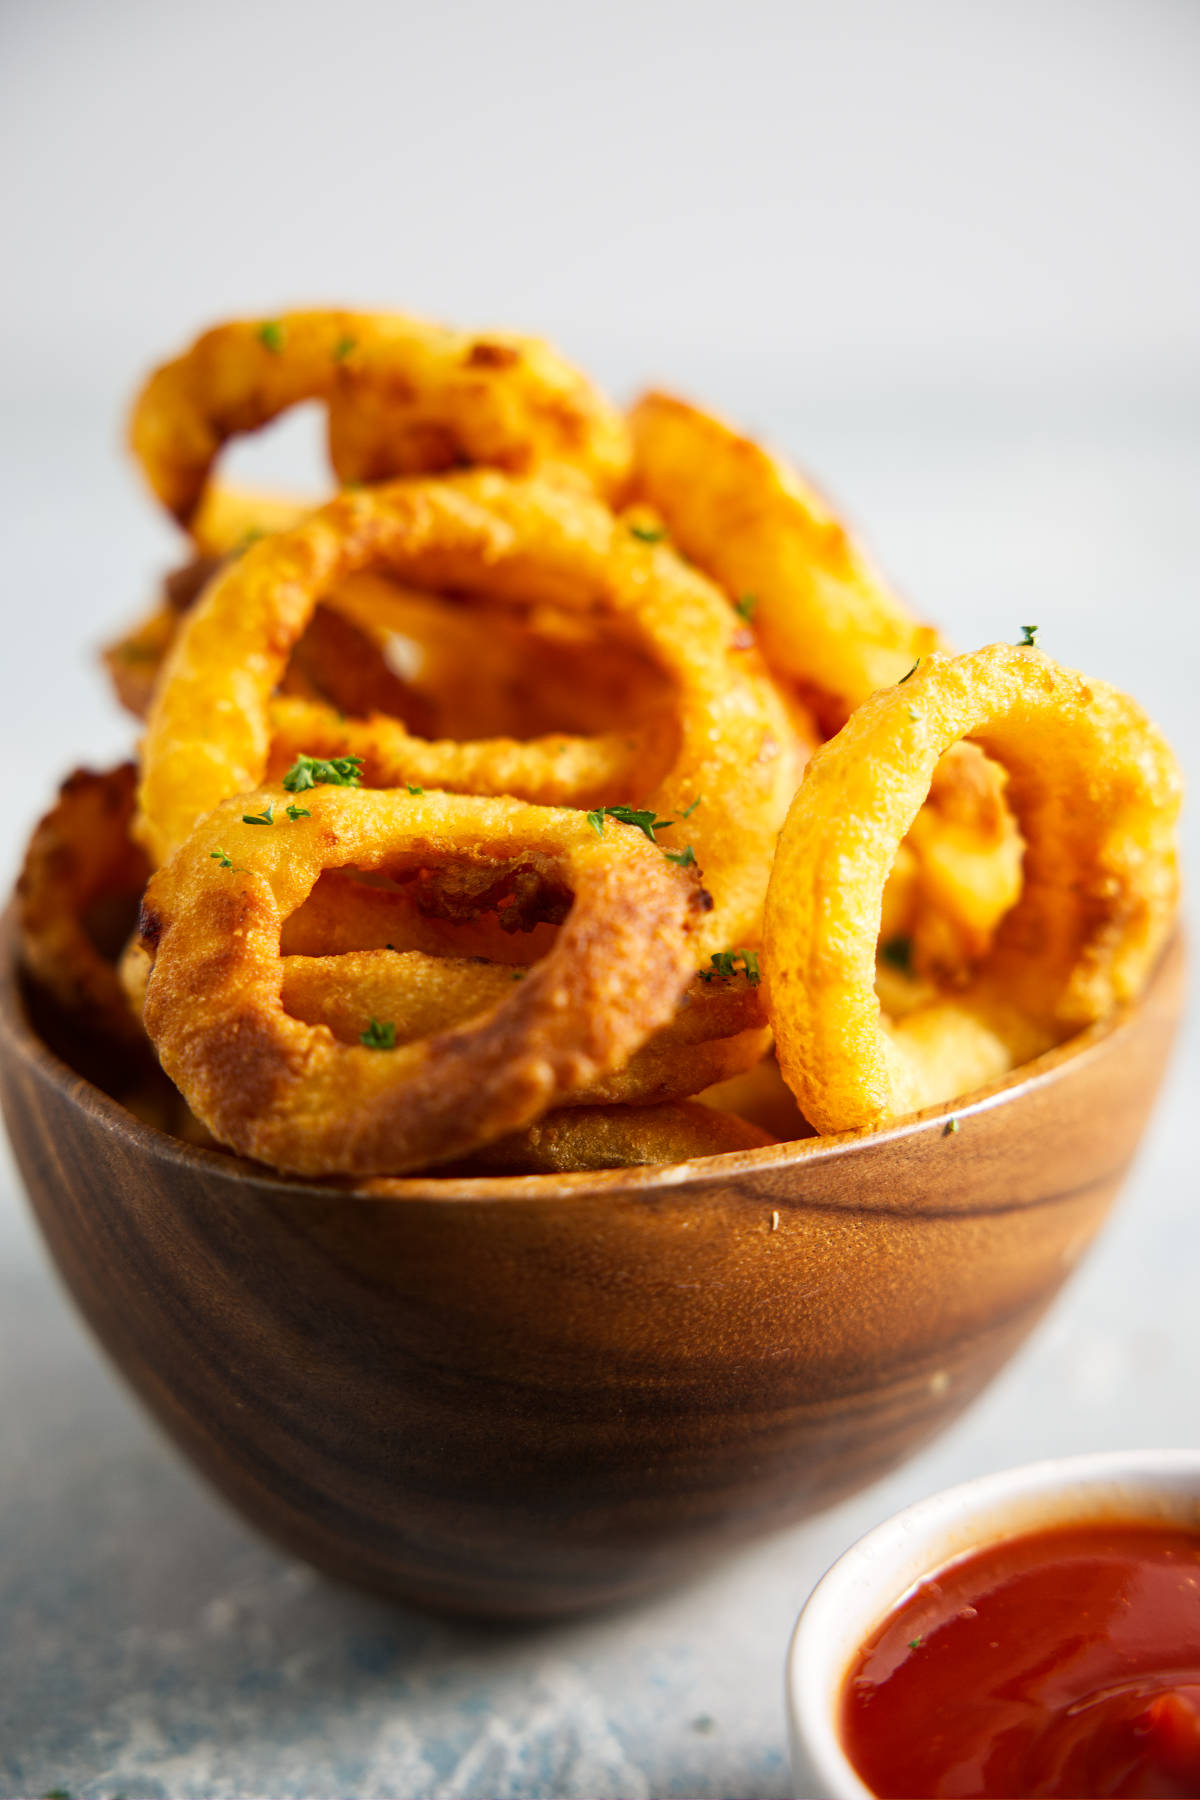 Wooden bowl filled with onion rings, bowl of ketchup